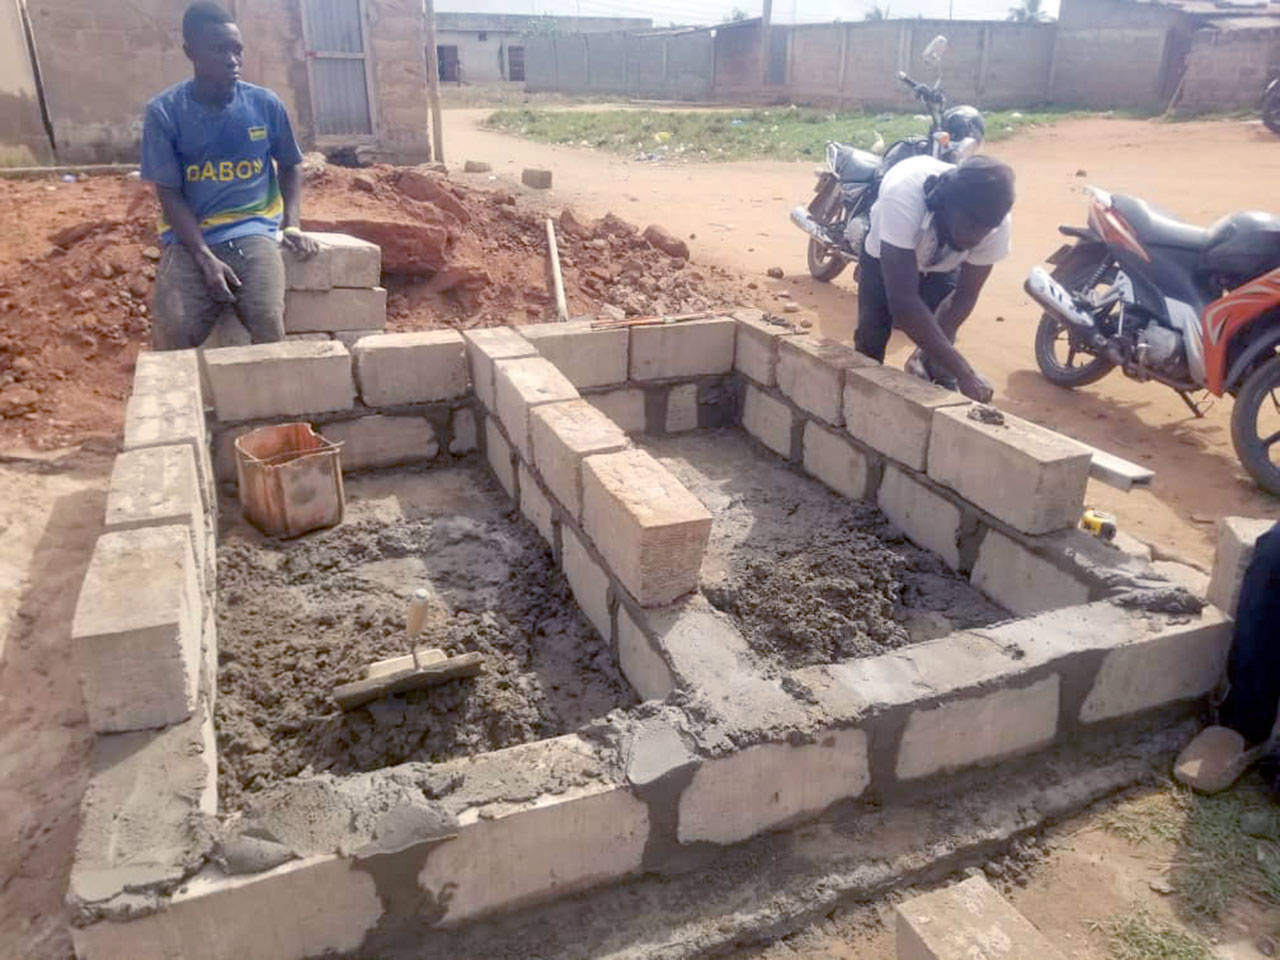 Workers build a composting toilet for a family in Togo.